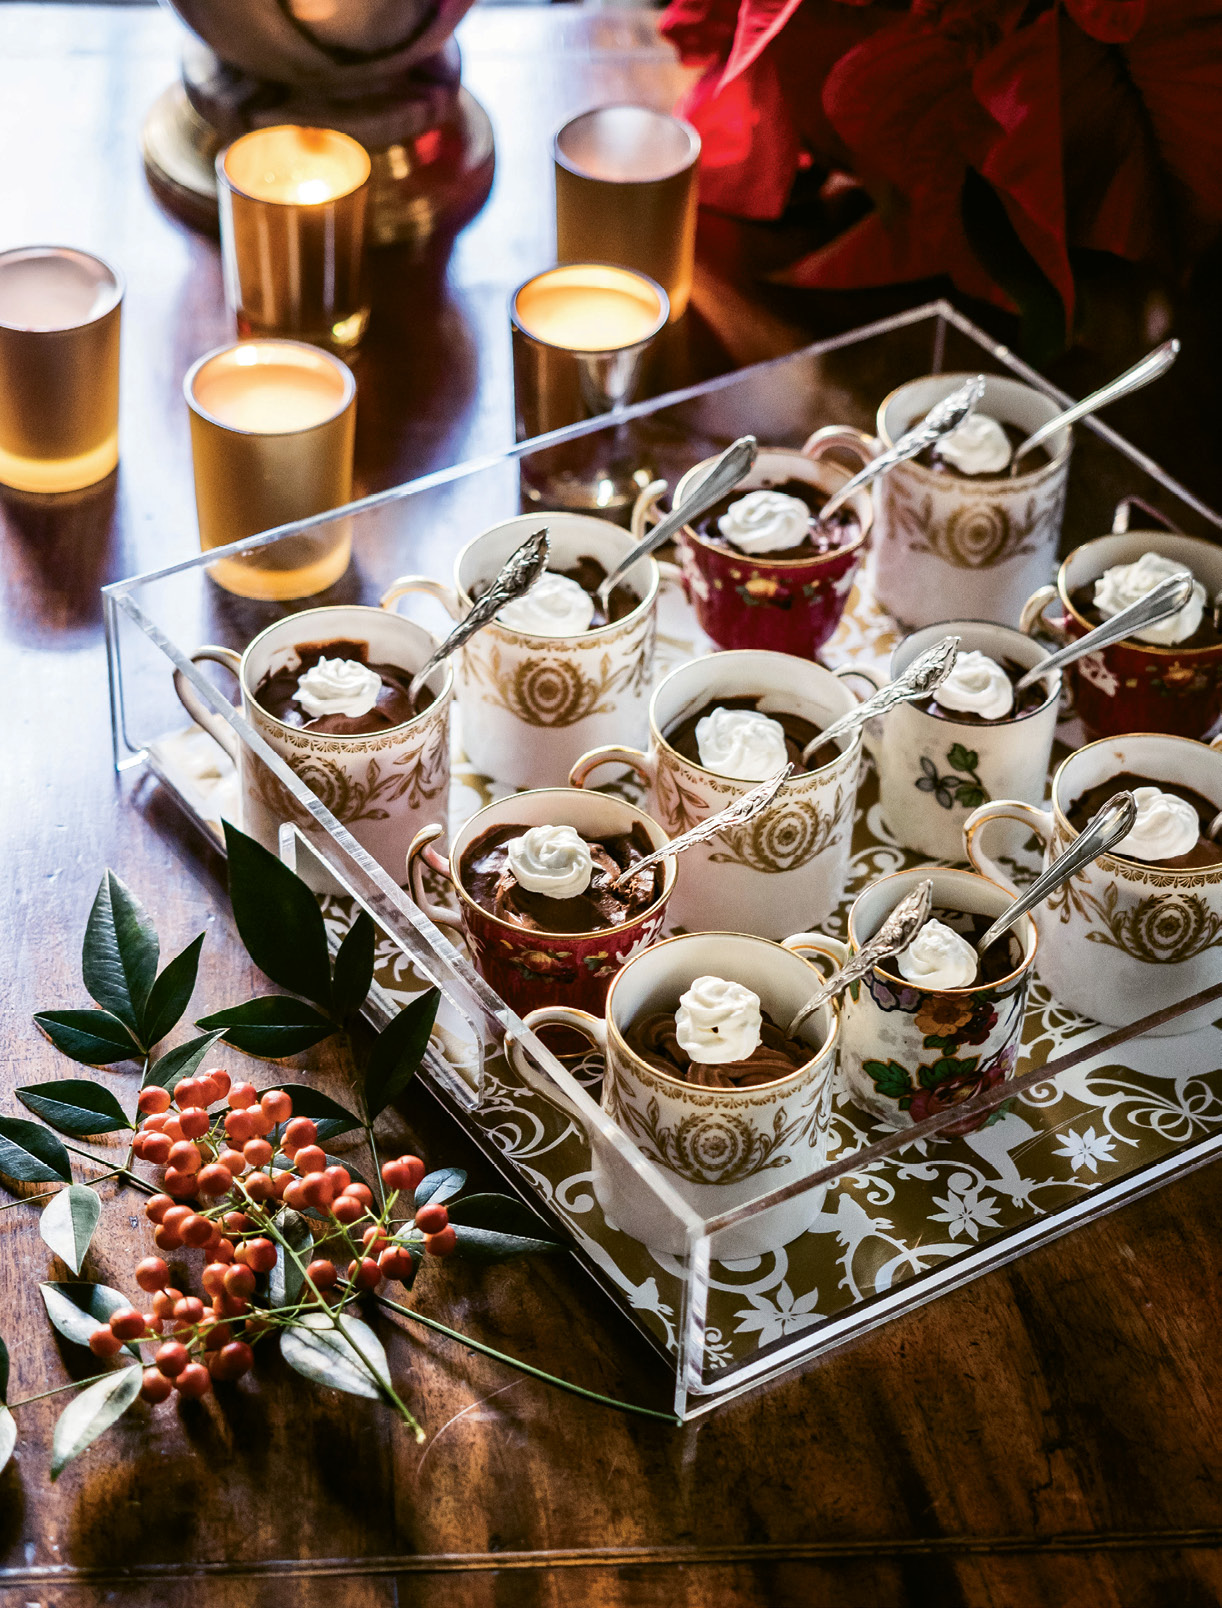 Serving chocolate pots de crème in vintage china cups makes them extra special.